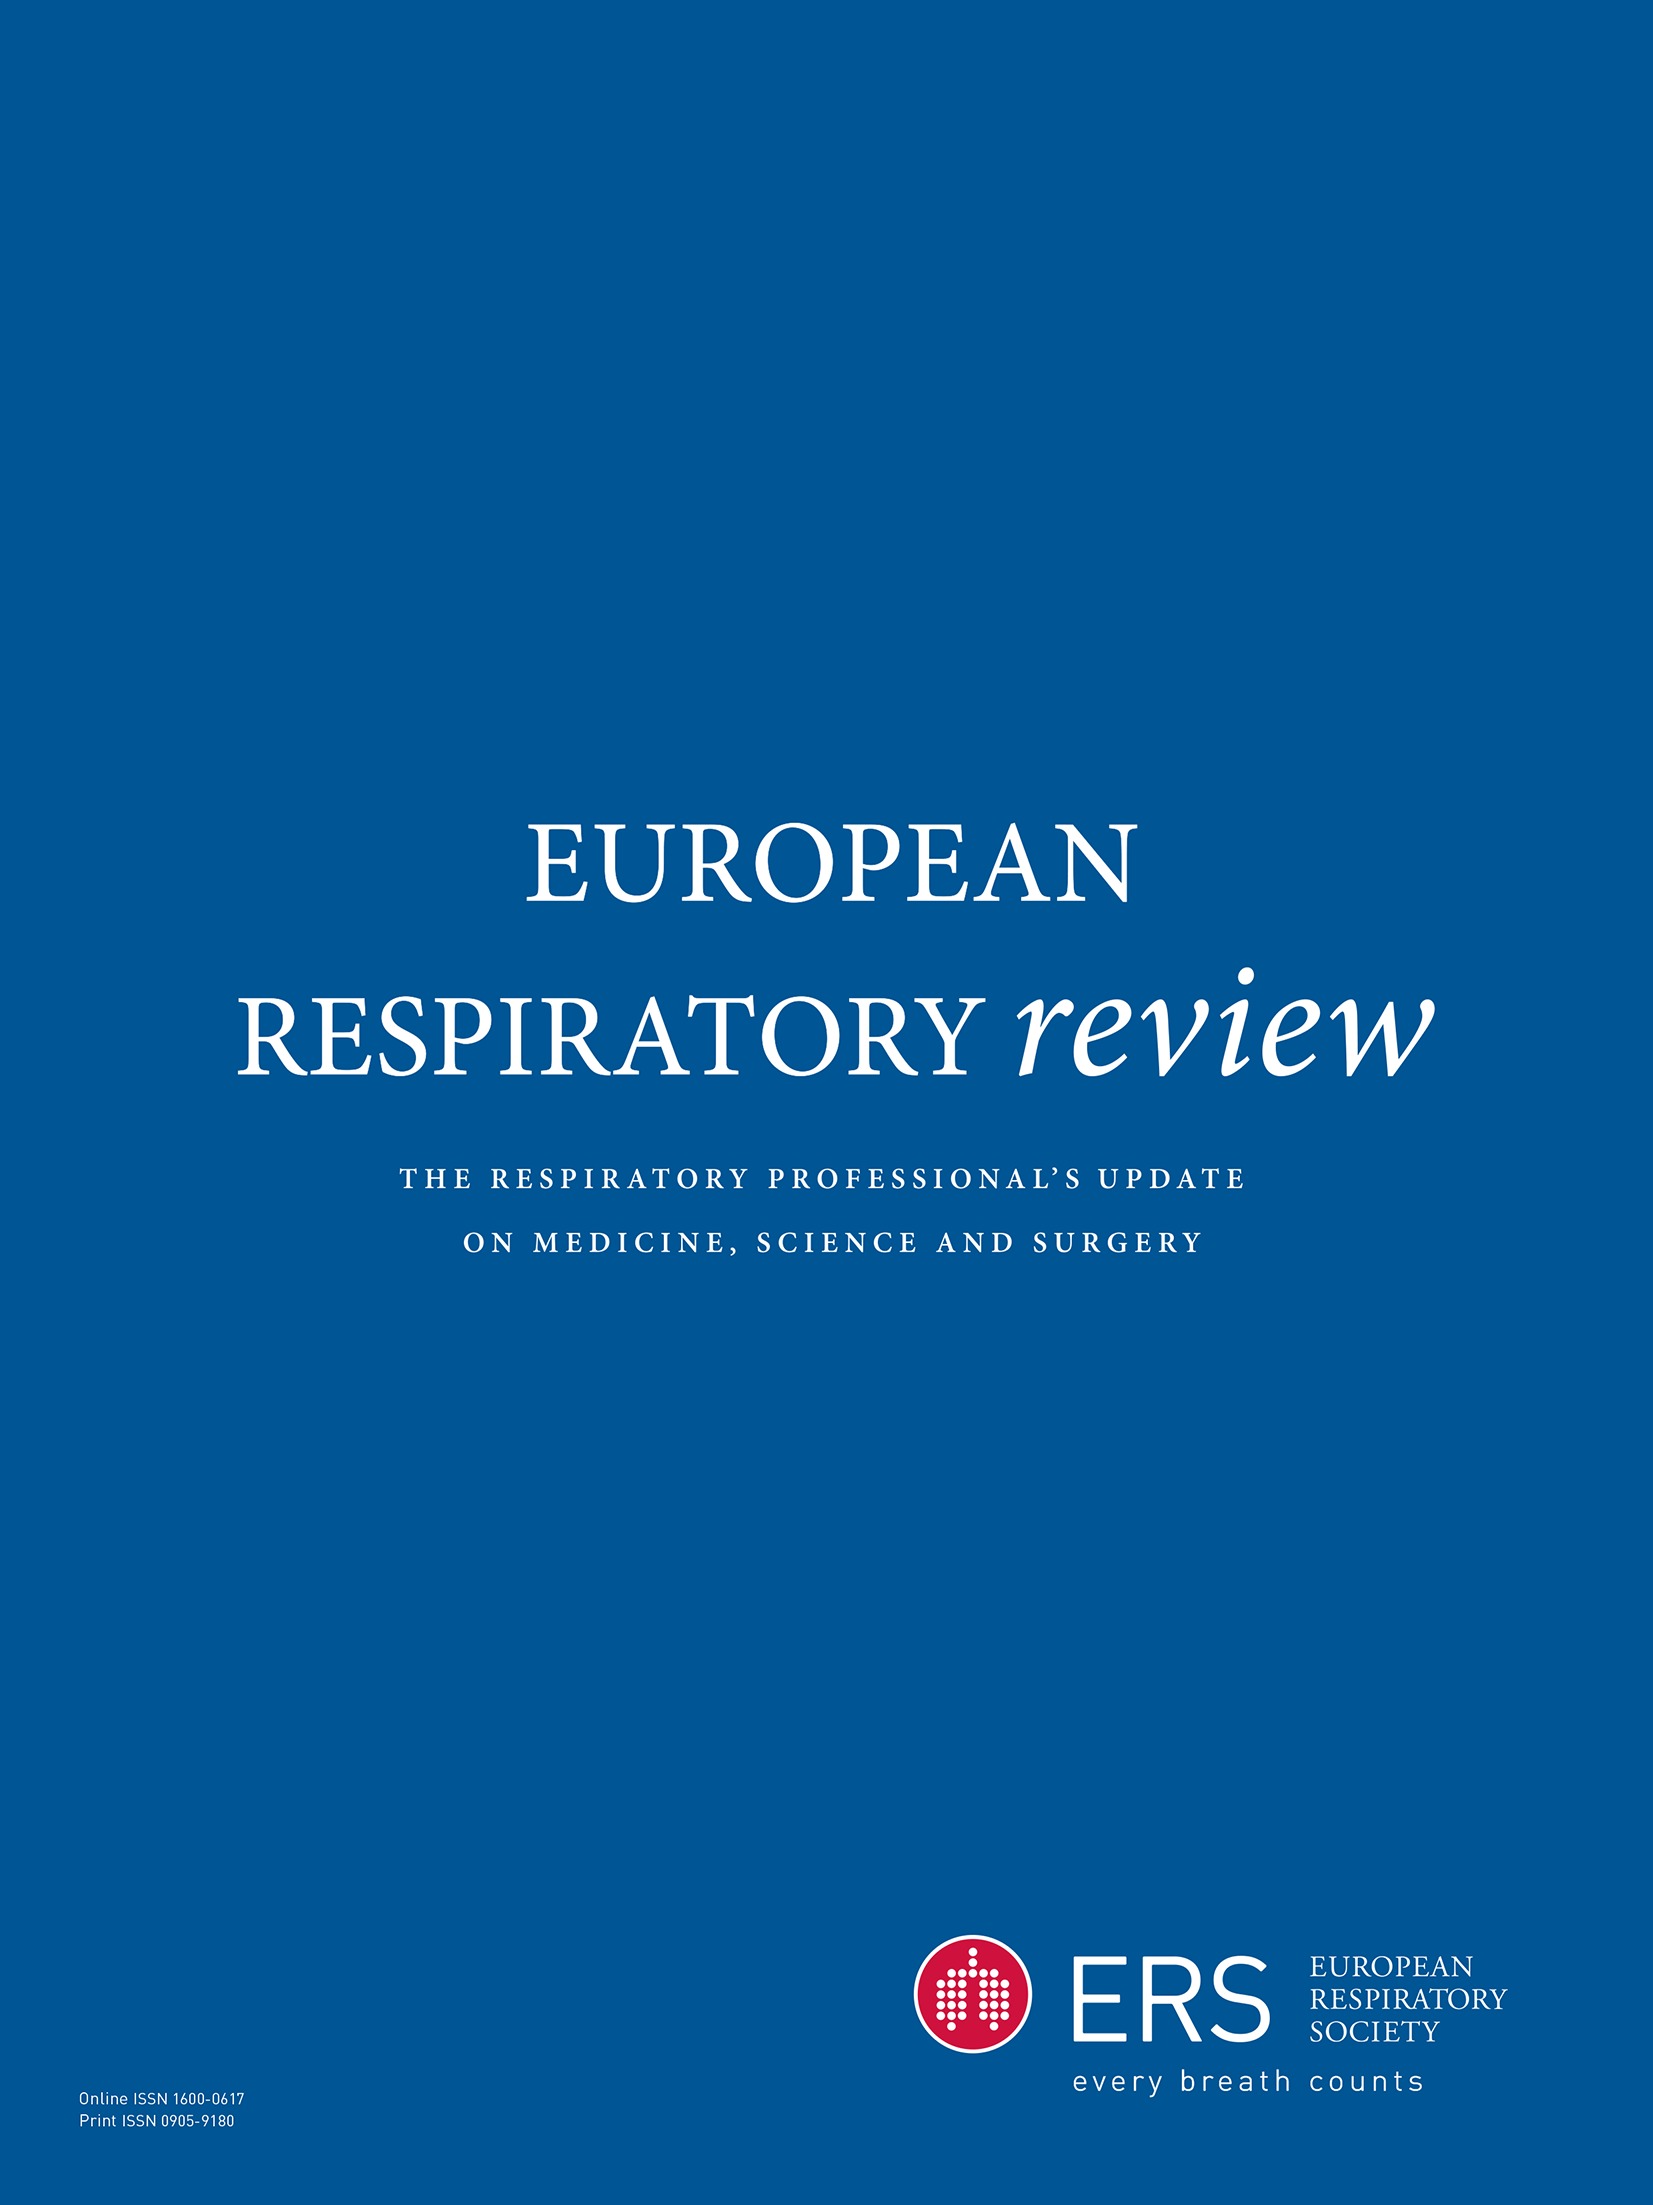 The prevalence of pulmonary hypertension in post-tuberculosis and active tuberculosis populations: a systematic review and meta-analysis